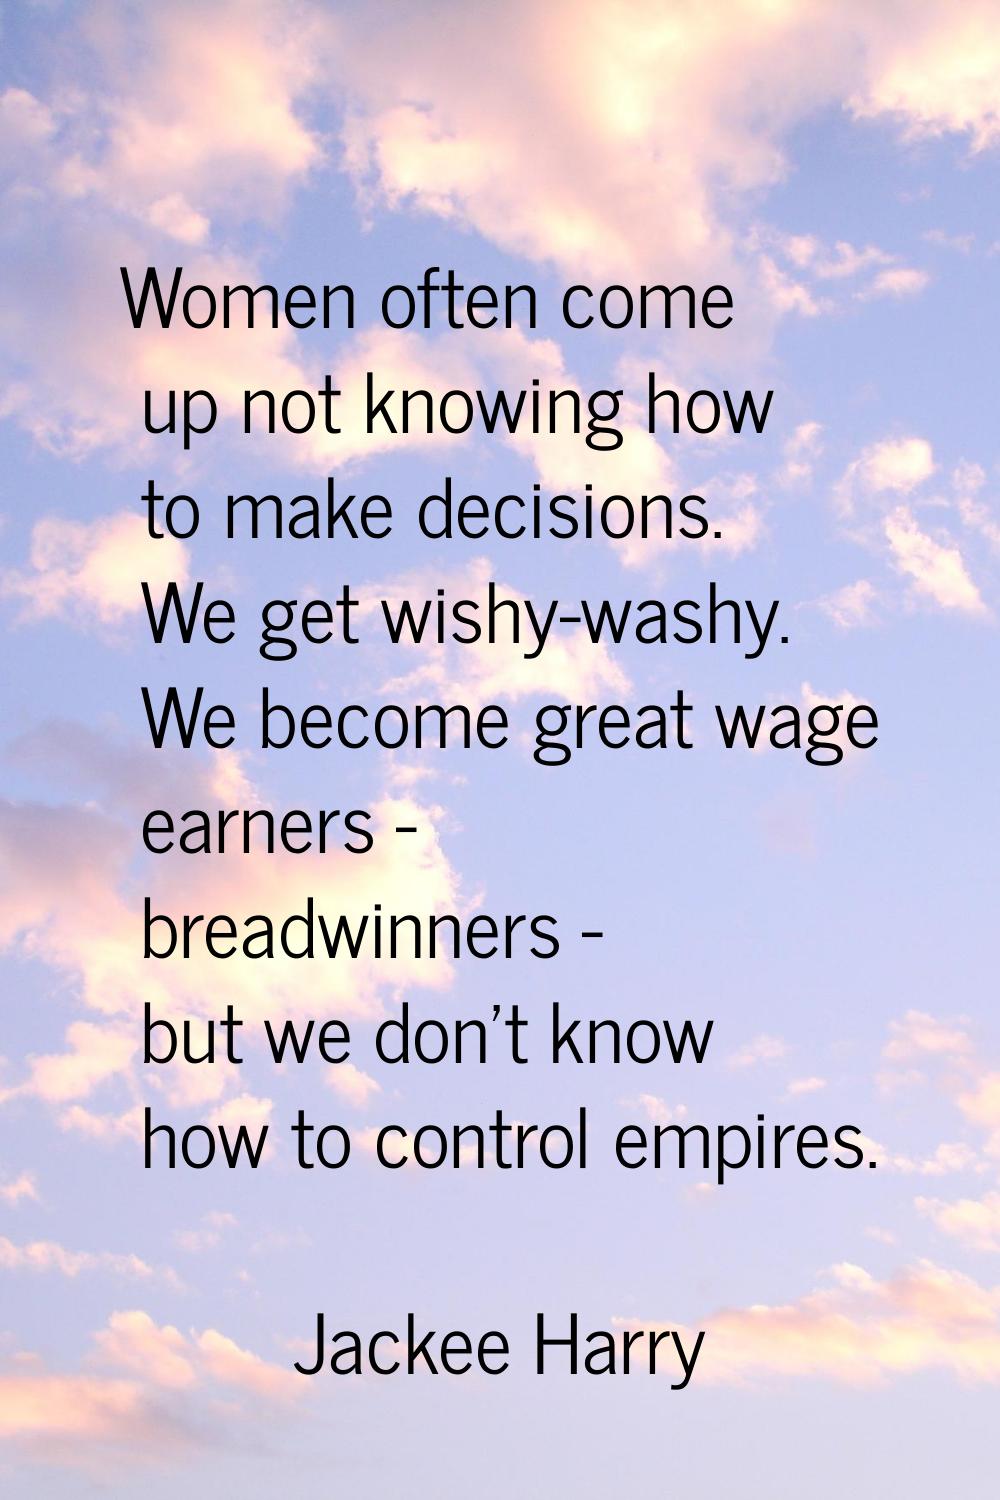 Women often come up not knowing how to make decisions. We get wishy-washy. We become great wage ear